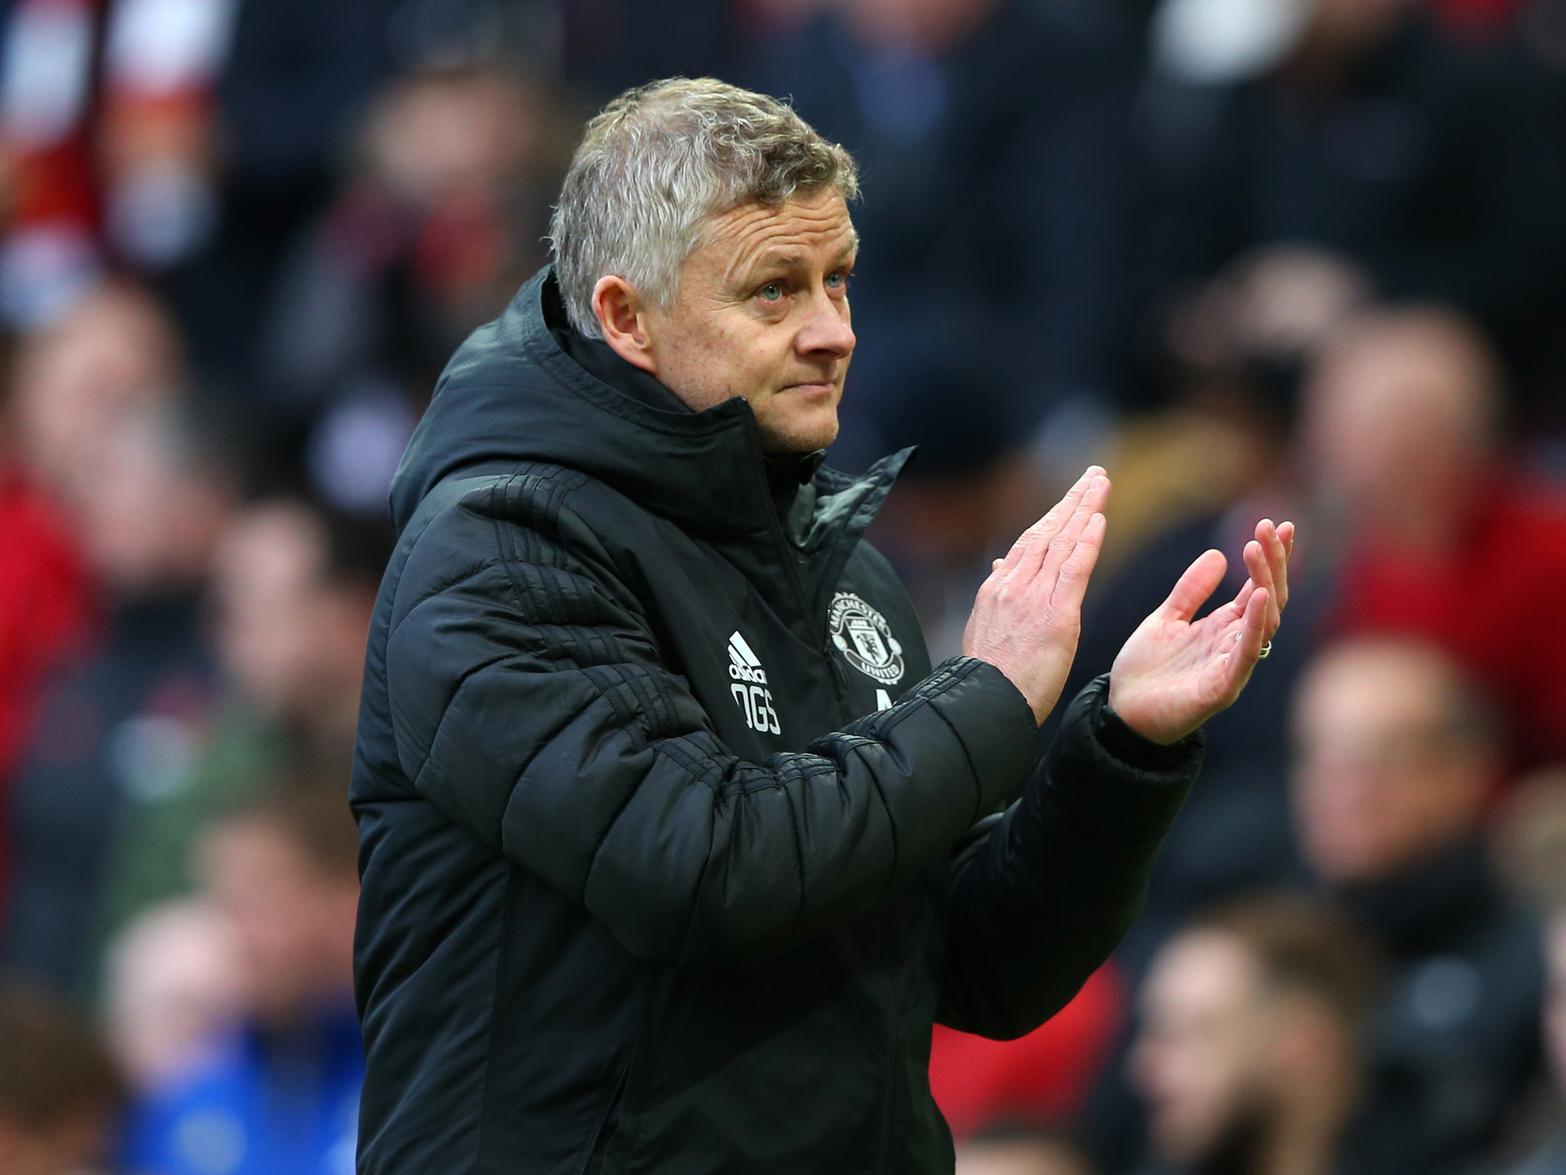 It was never going to be an easy job at Old Trafford, but the Manchester United boss is trying to make the most of what he's got. He's been favourite to get the sack three times since the start of the season.